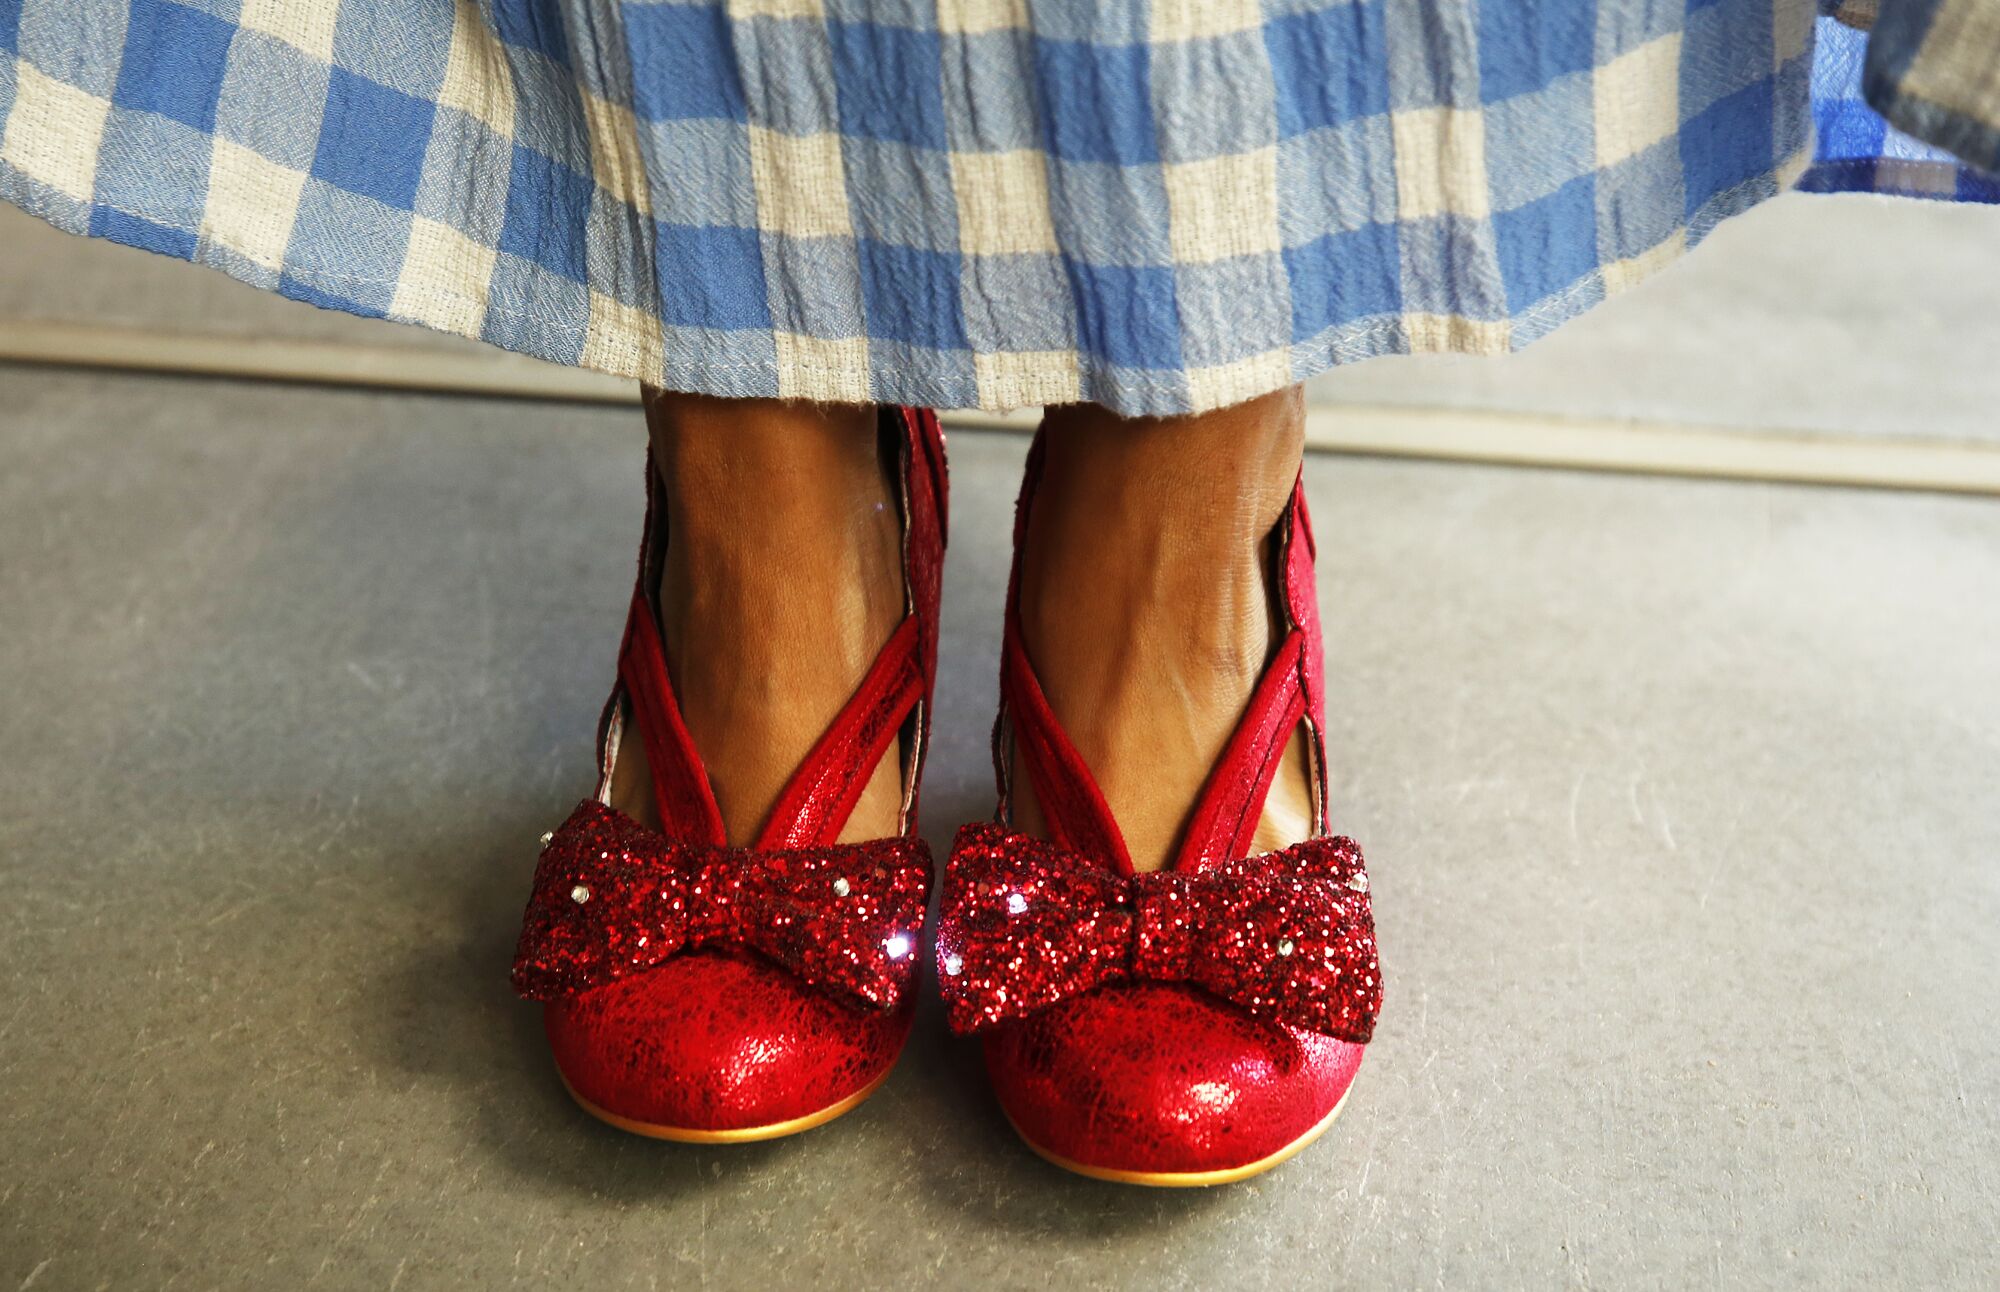 A woman's feet in her own "ruby slippers" below the hem of her blue-and-white gingham skirt.